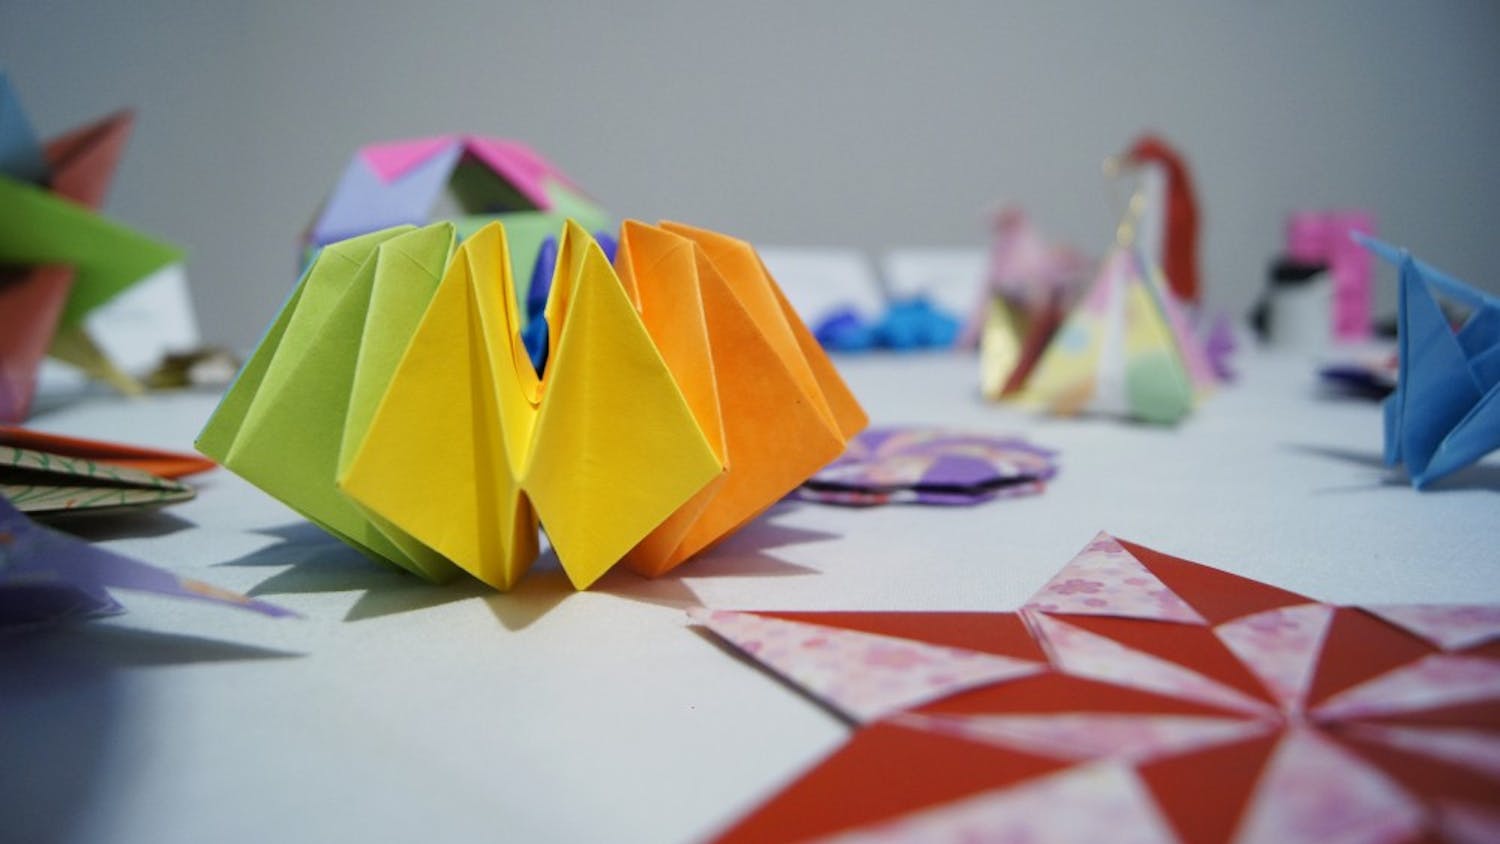 Children create Japanese crafts at the Ackland Art Museum in celebration of Bunka-no-hi (Culture Day) in Japan.